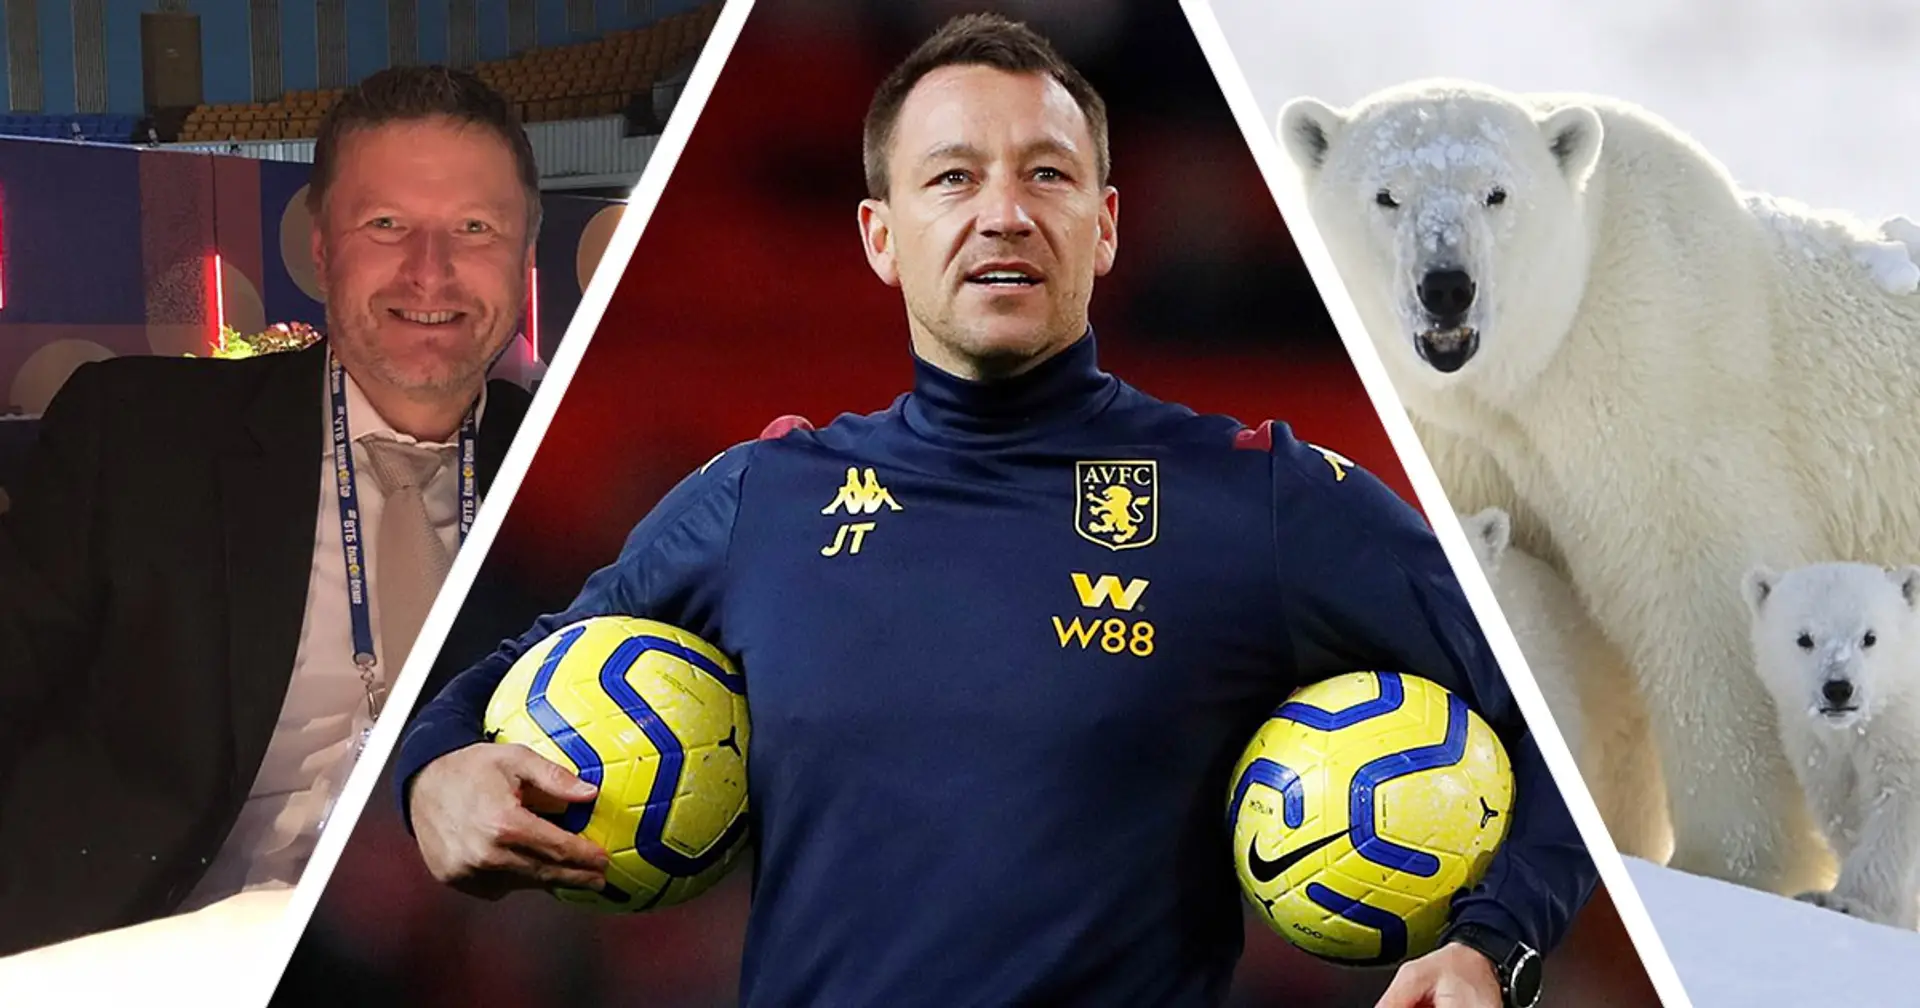 'Polar bears walking down the street': Italian agent reveals why Terry never joined Spartak Moscow